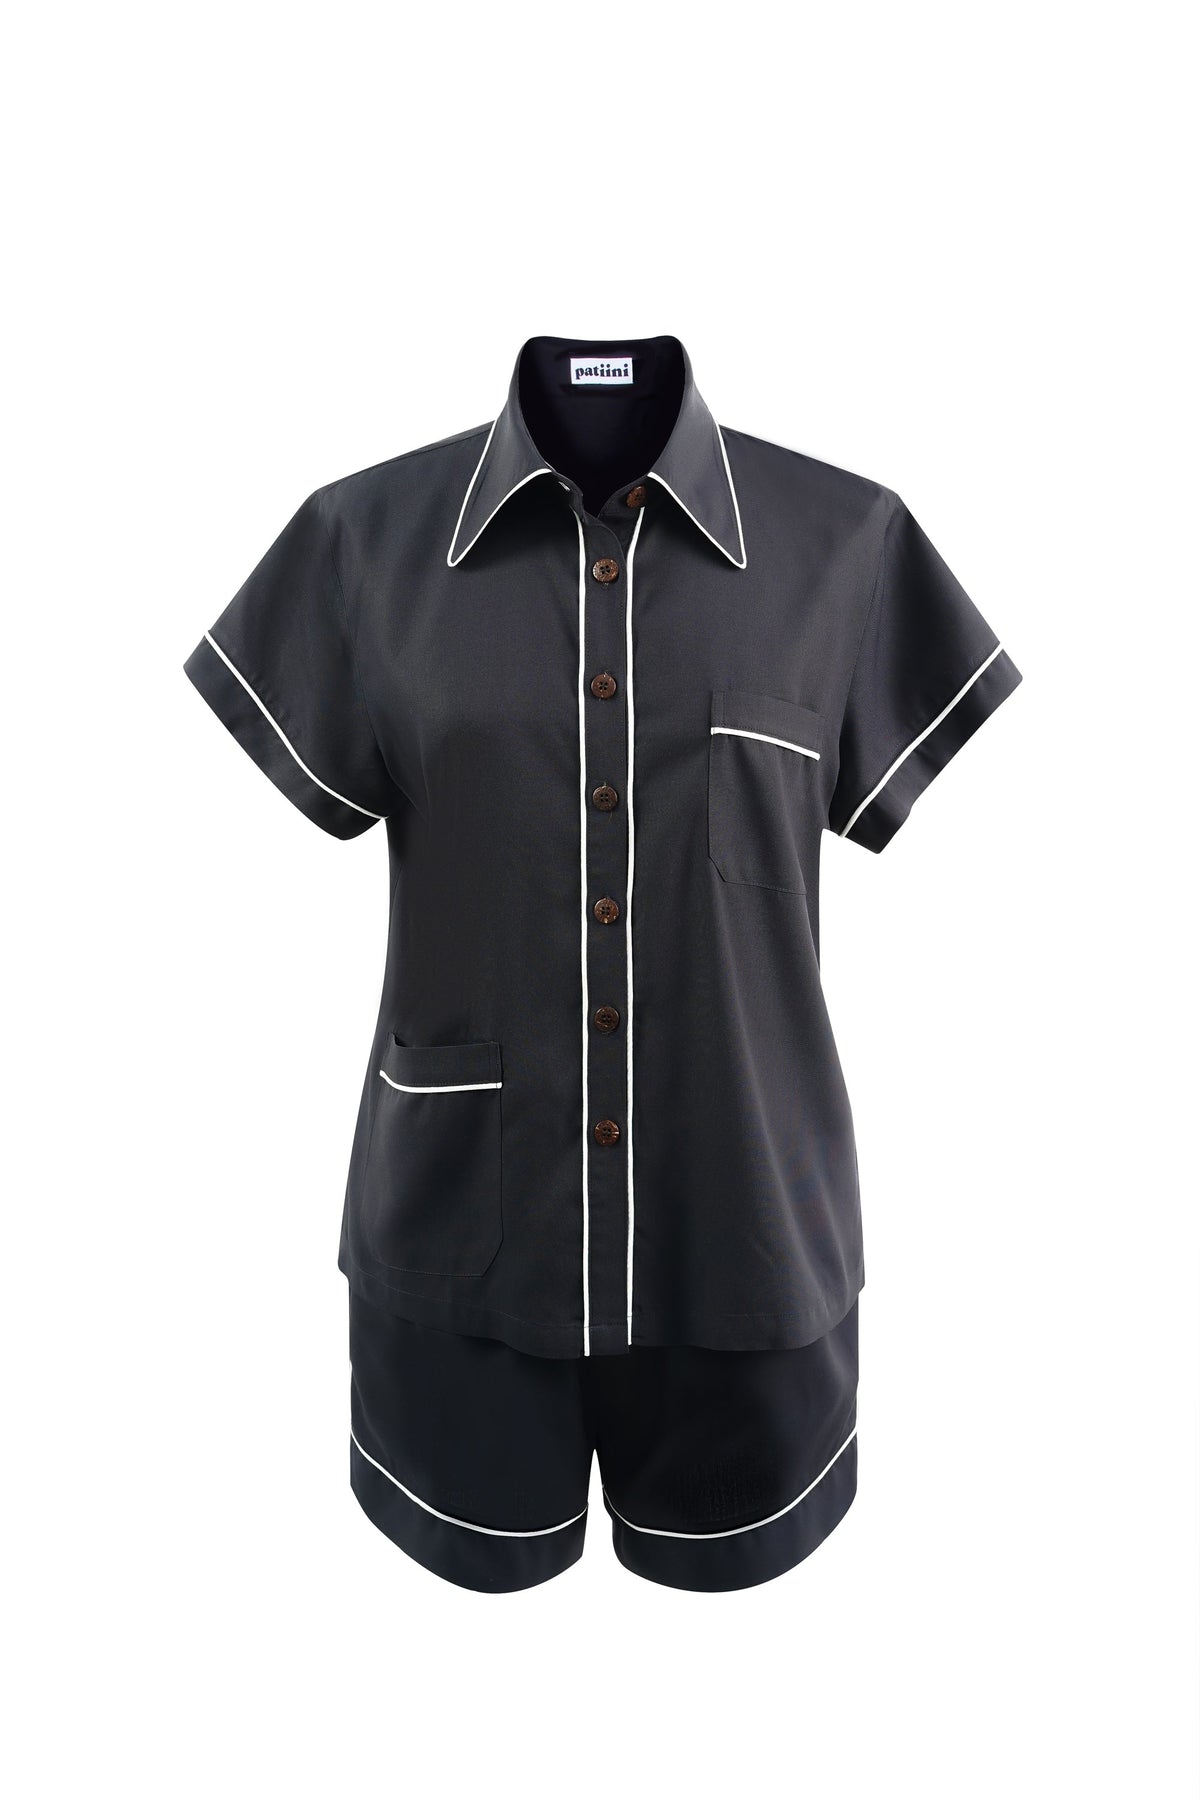 Black short-sleeve pajama set with contrasting white piping.